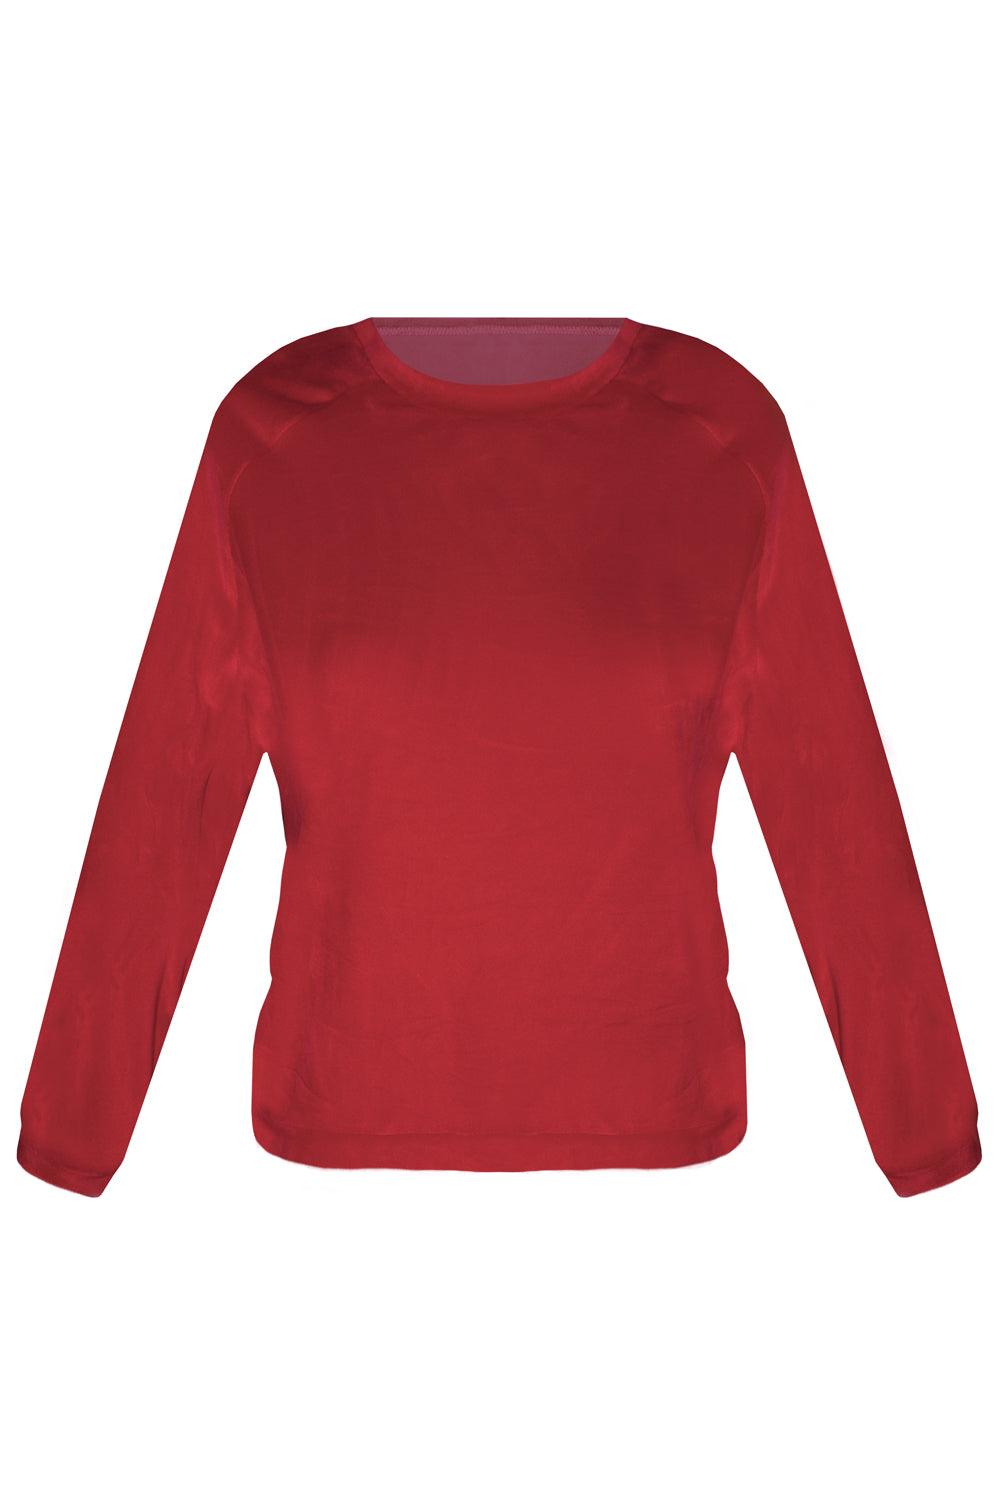 Foxy Red sweater - Sweater by yesUndress. Shop on yesUndress